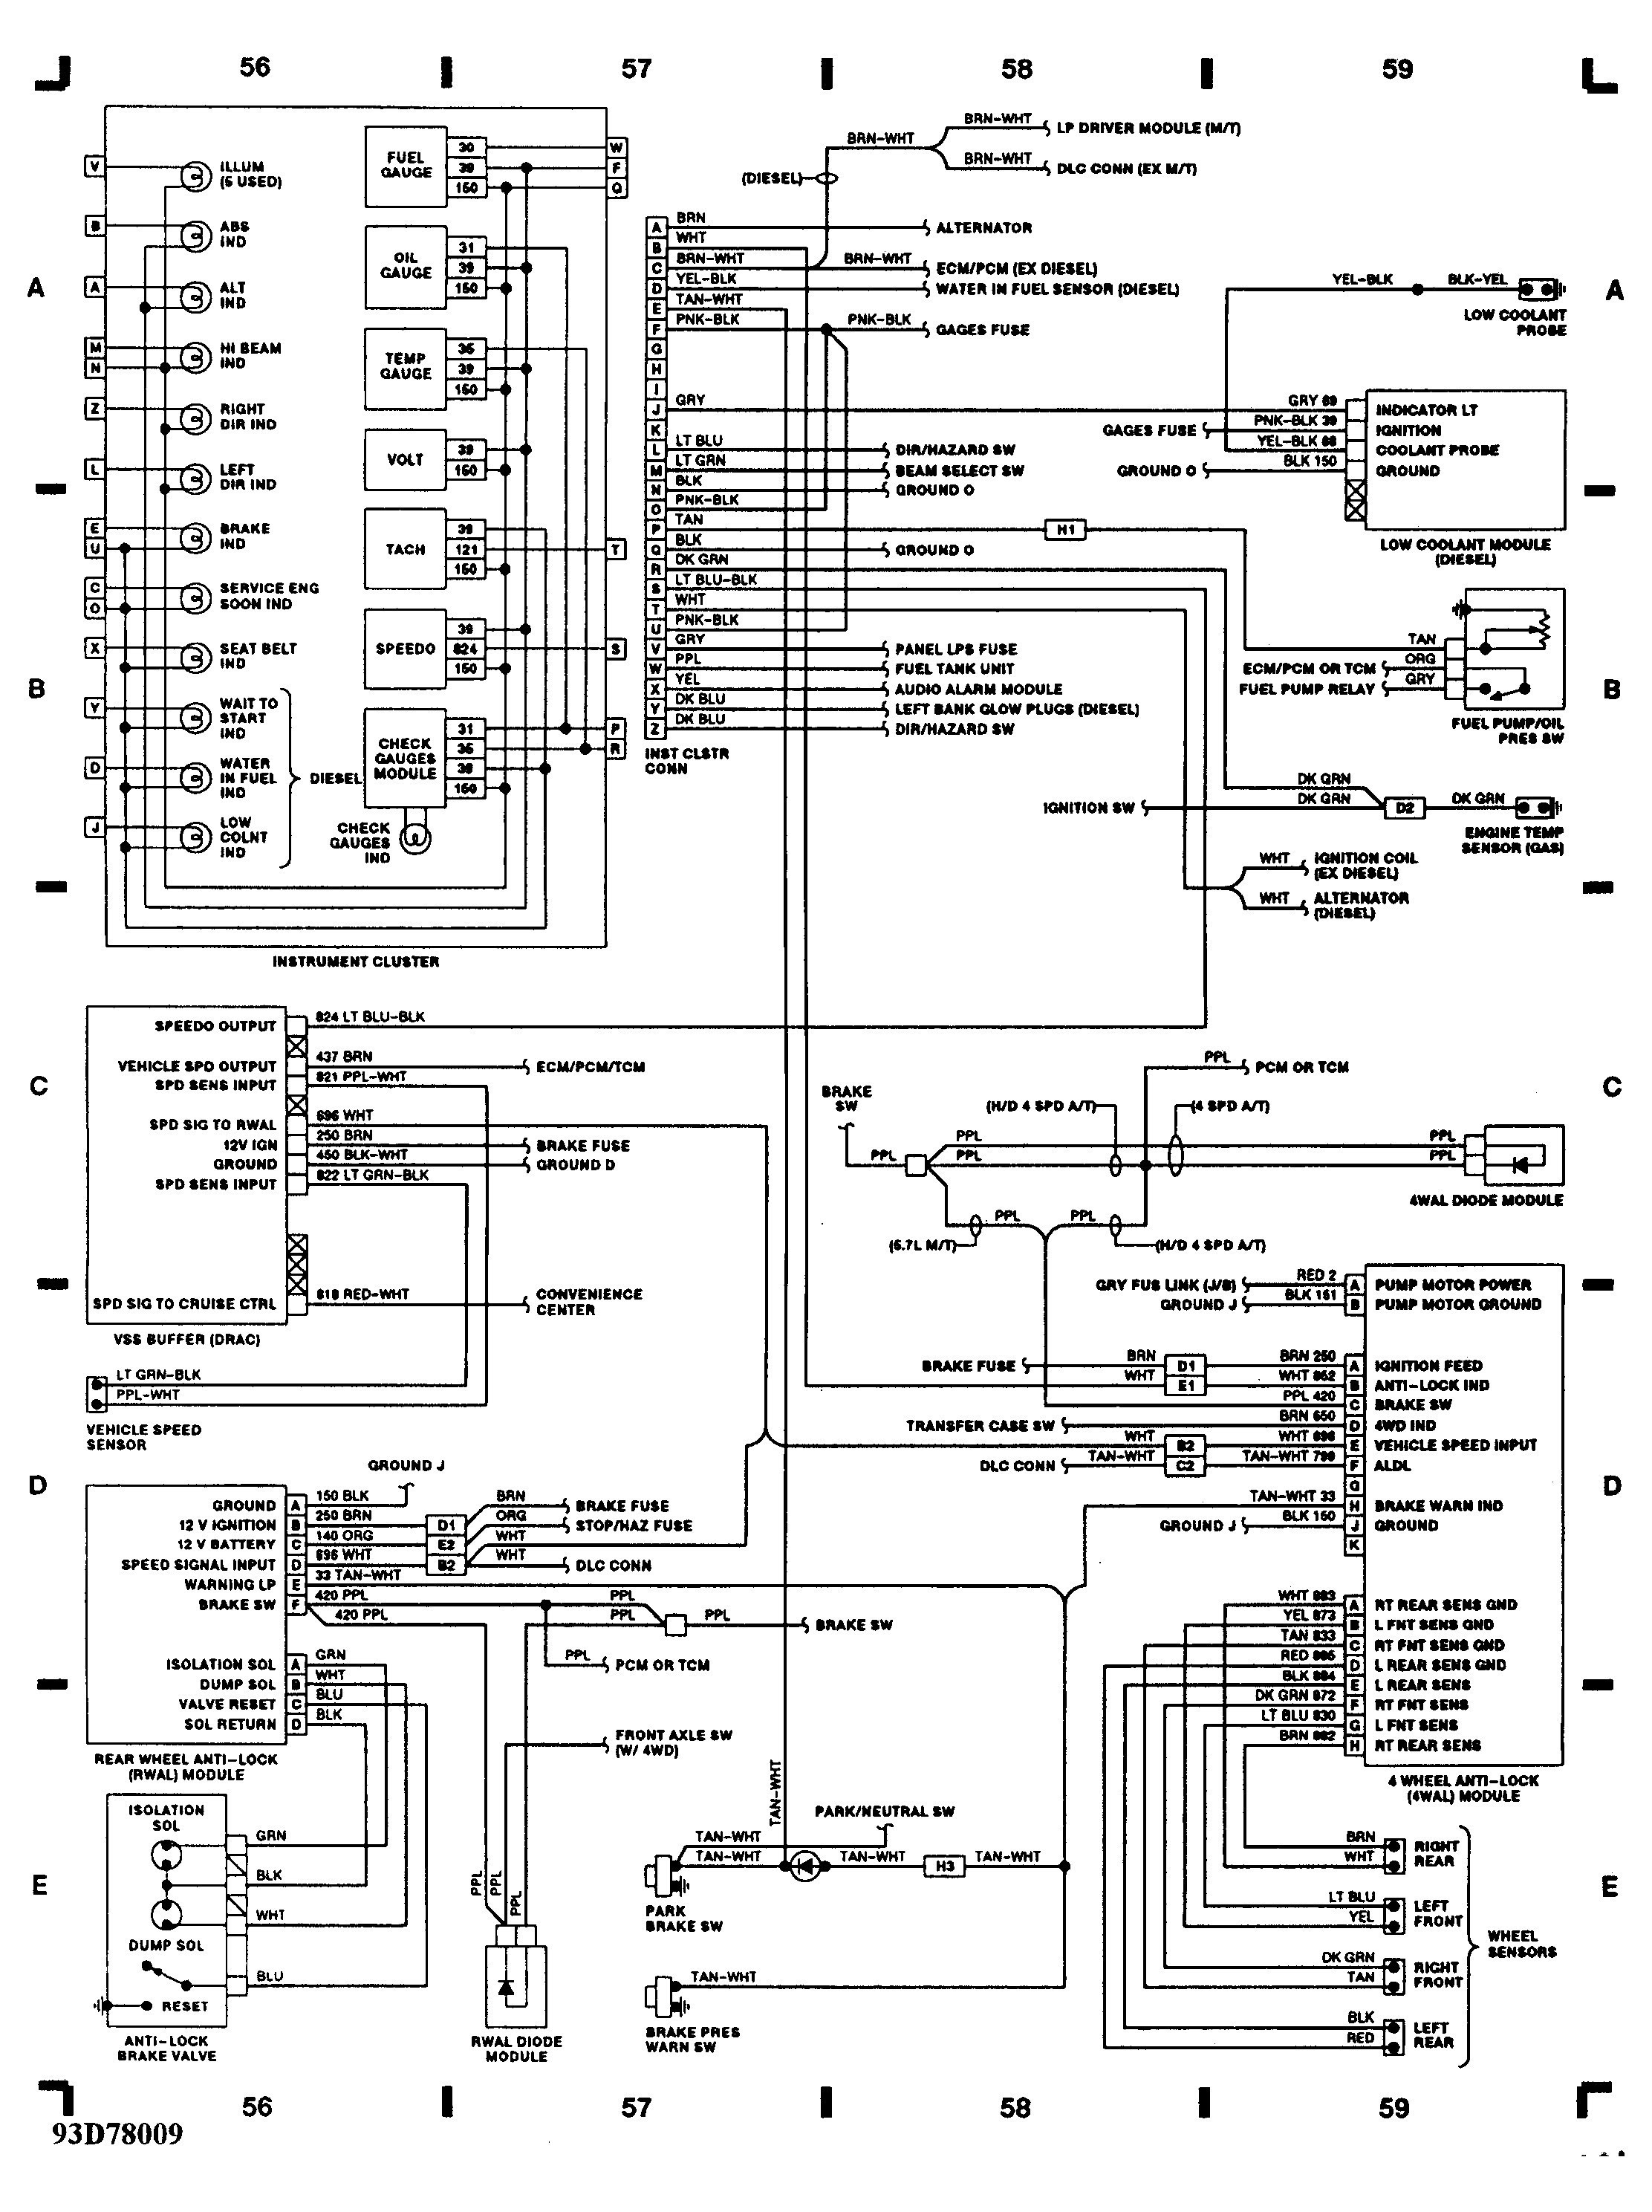 Gm Ls1 Engine Wiring Diagram Wiring Diagram Local Load Vehicle Load Vehicle Otbred It